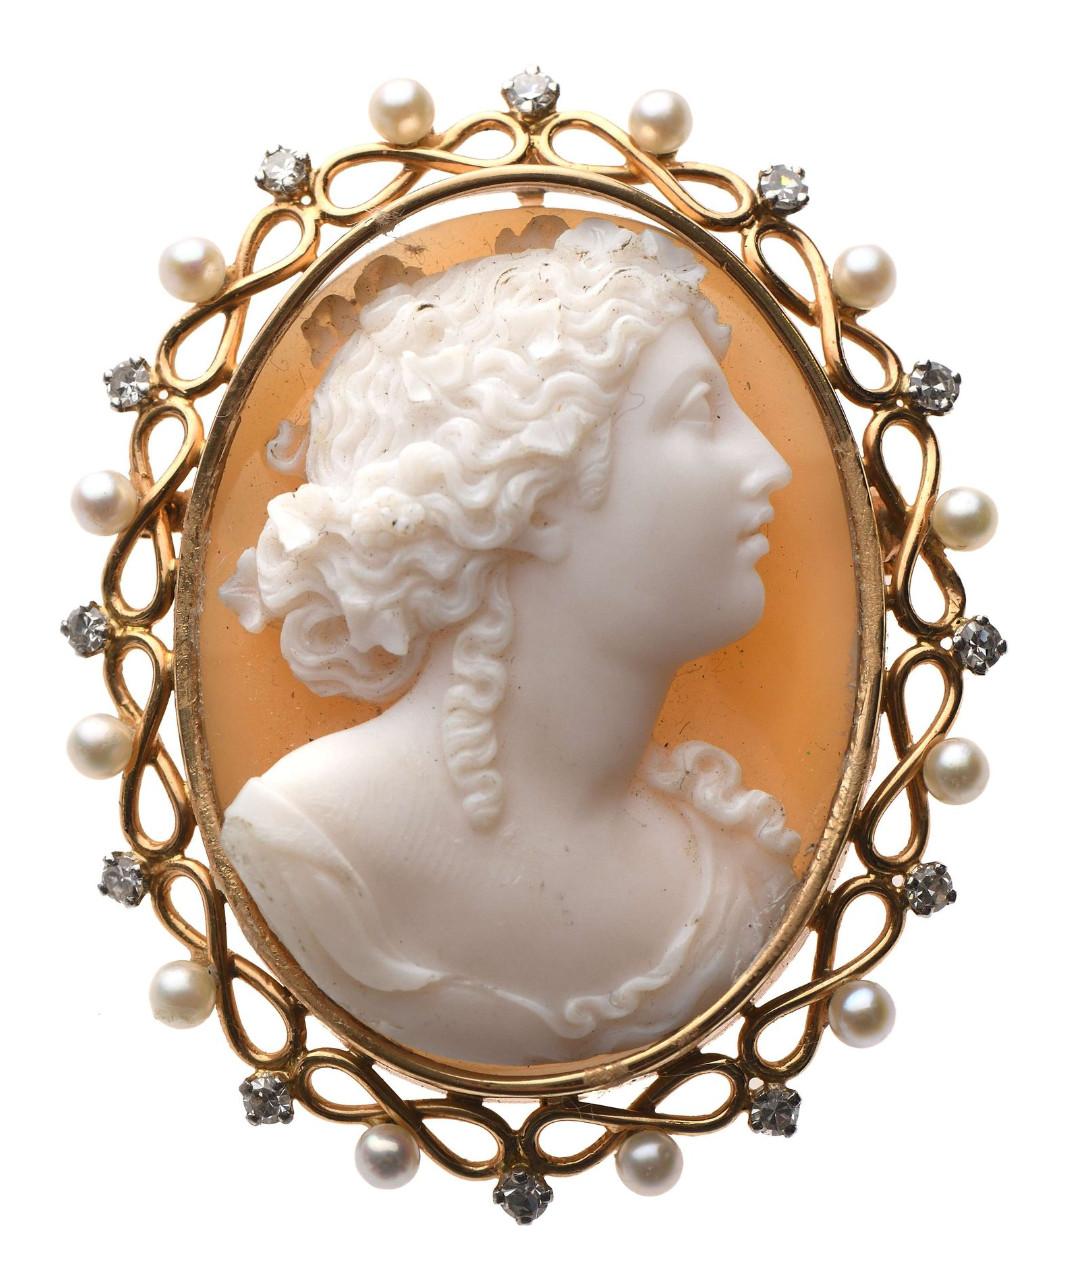 Old European Cut Antique Gold Diamond and Agate Cameo Brooch/Pendant